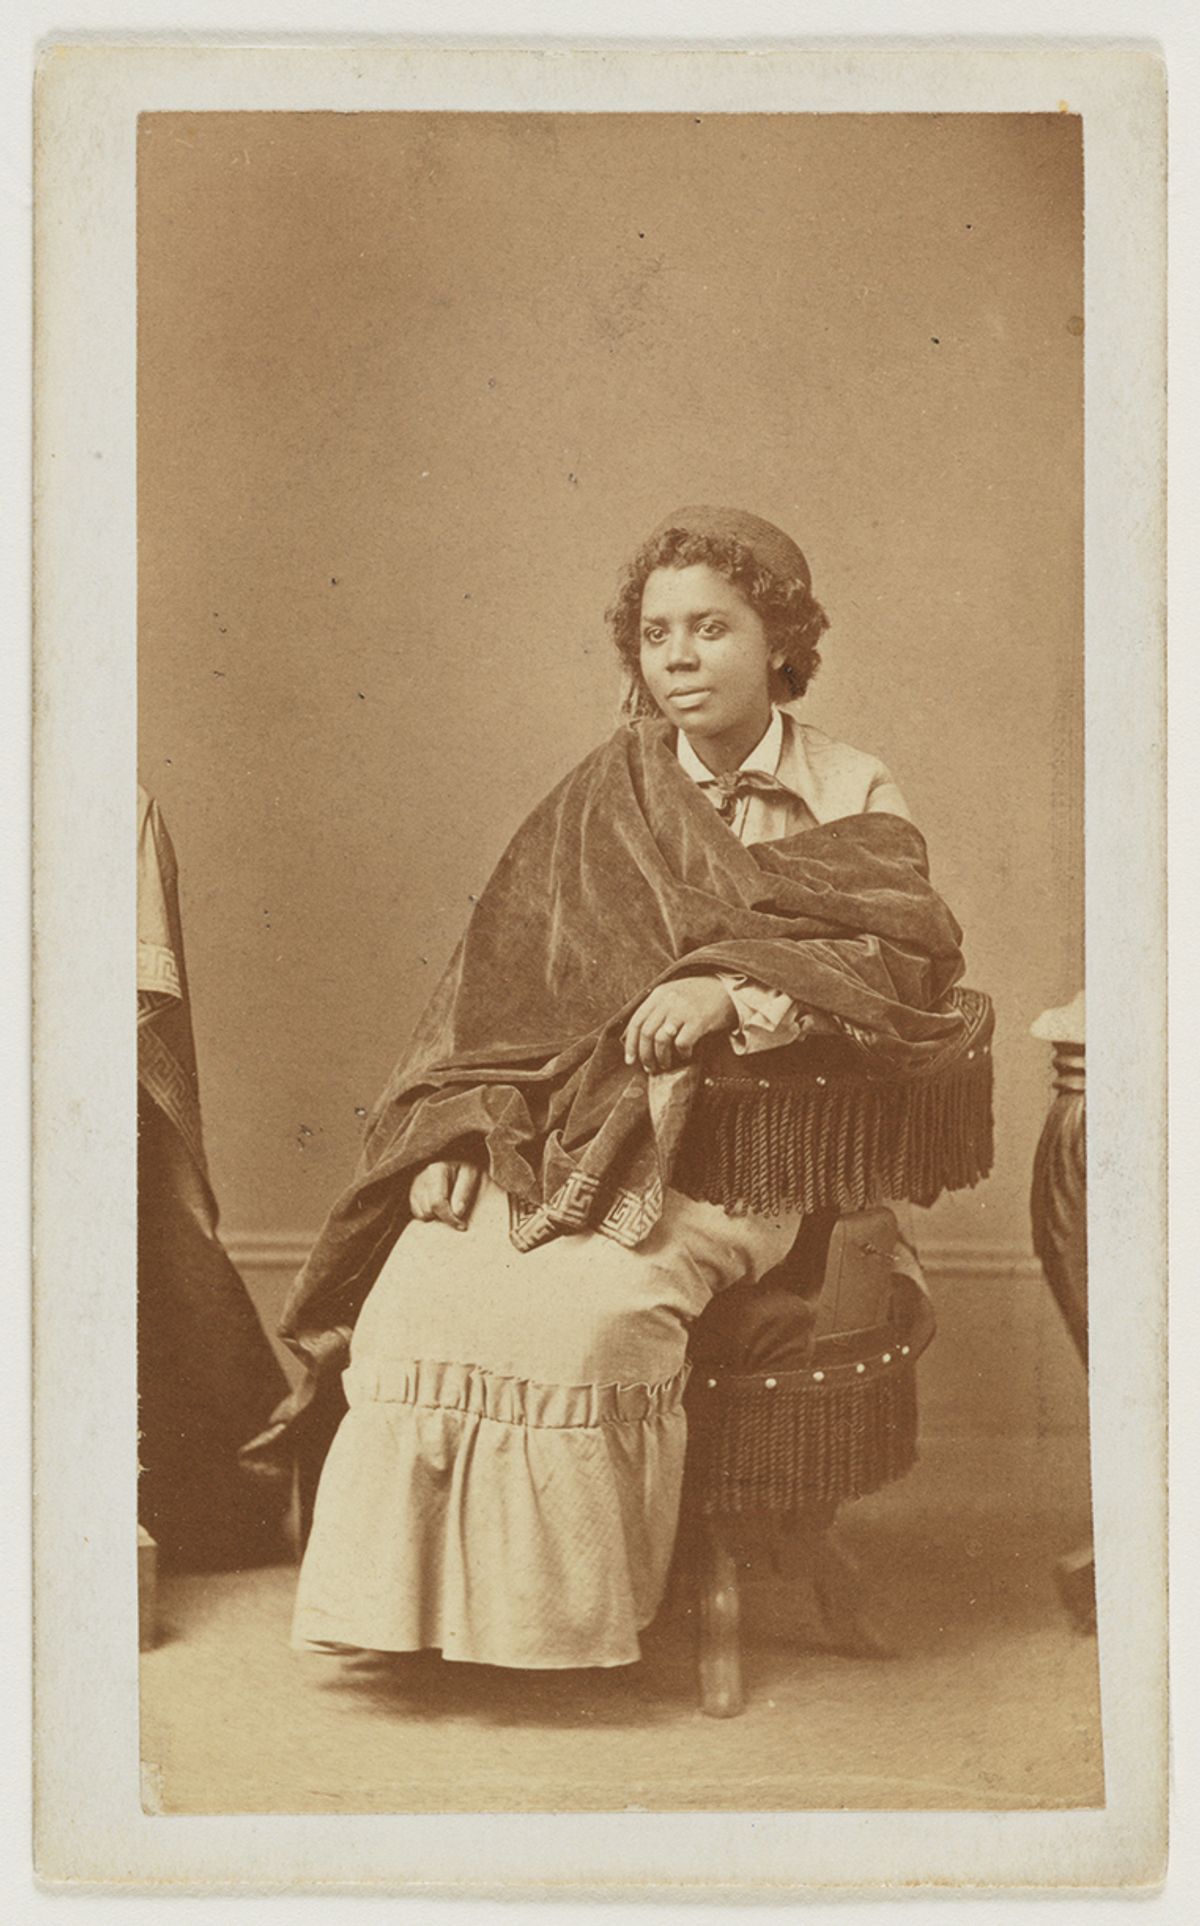 Edmonia Lewis (1844-1907), one of the inspirations for the novel’s heroine, captured by Henry Rocher in 1870 National Portrait Gallery/Smithsonian